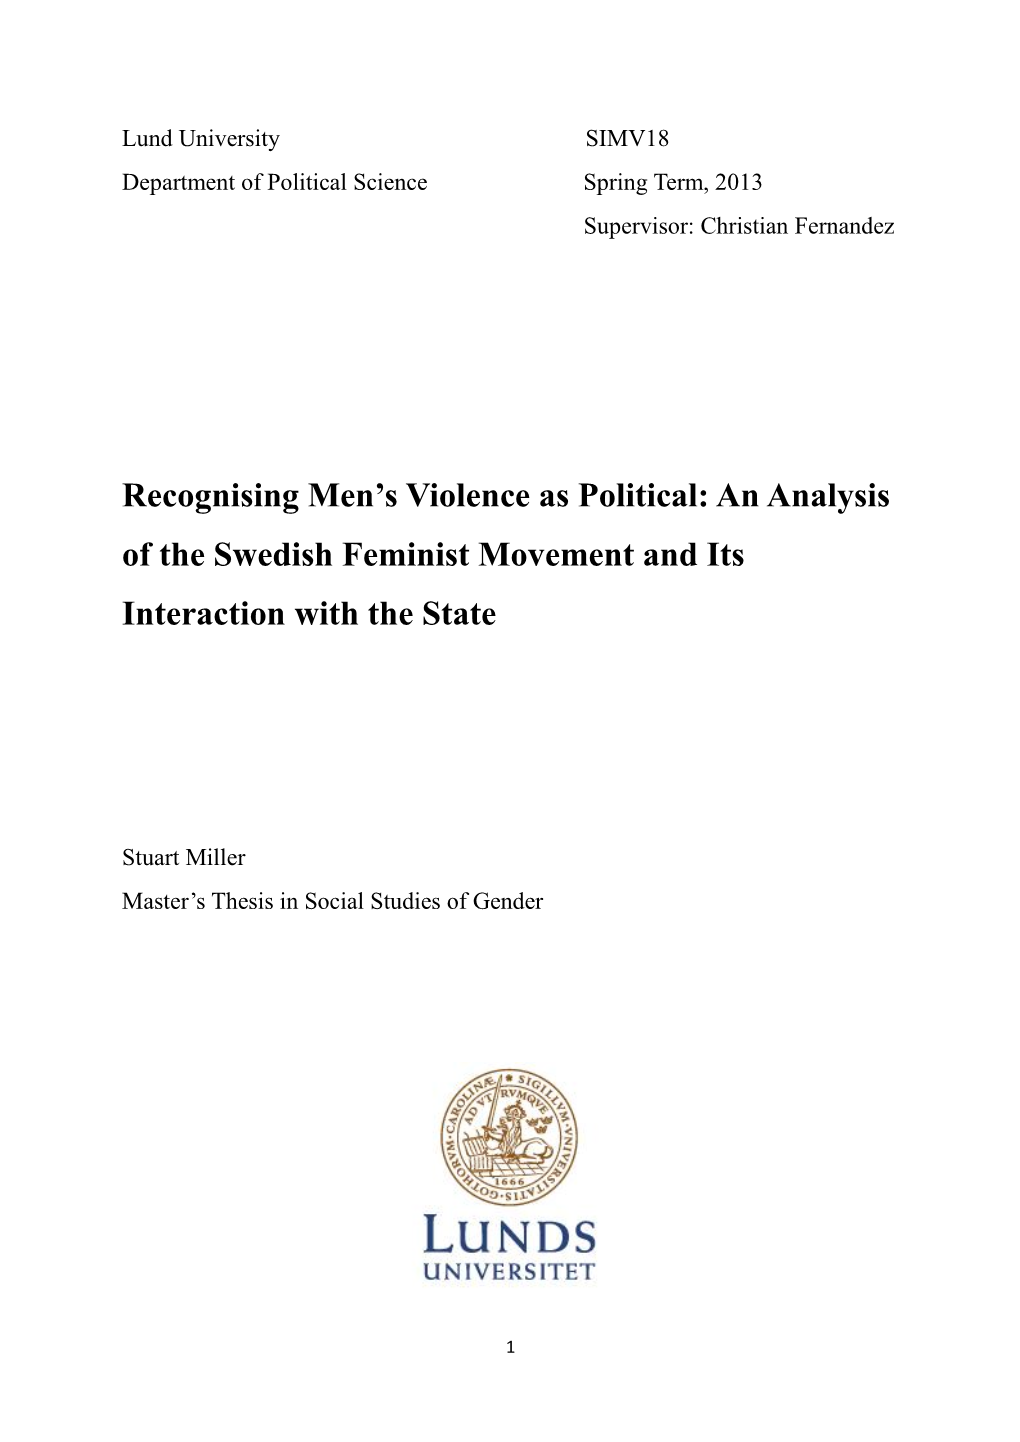 An Analysis of the Swedish Feminist Movement and Its Interaction with the State